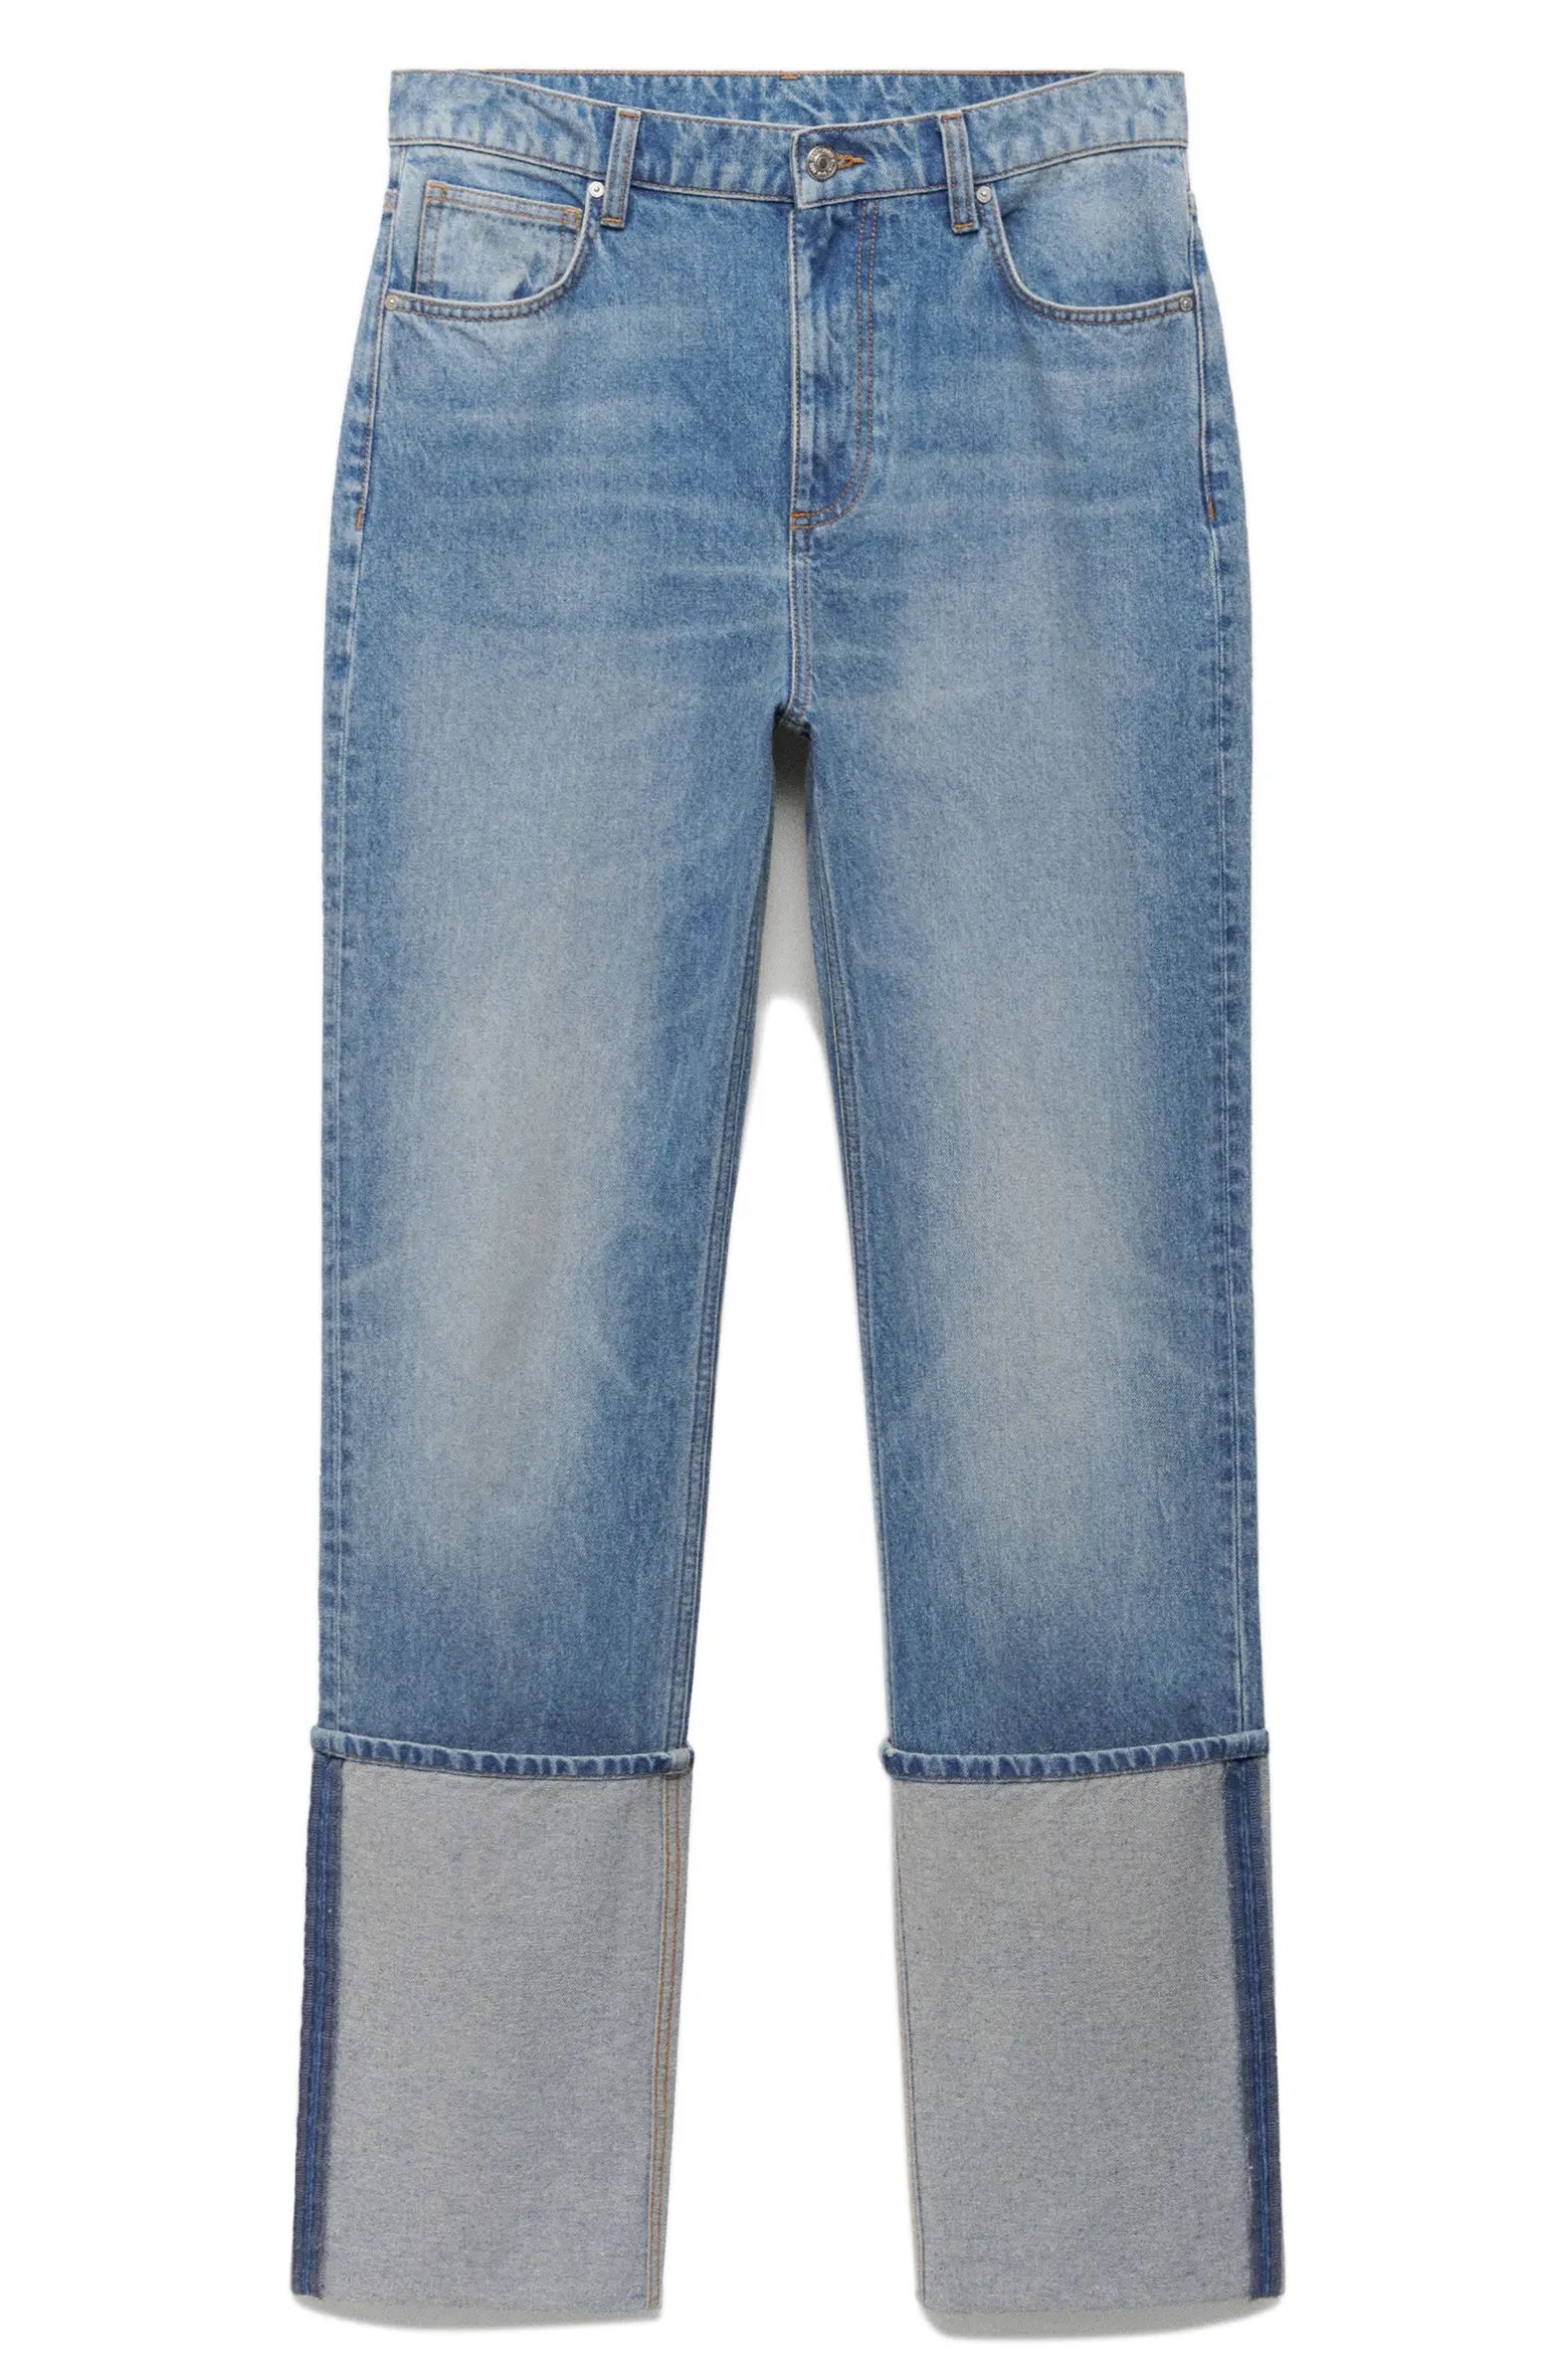 MANGO Turned-Up Cuff Straight Leg Jeans | Nordstrom | Nordstrom